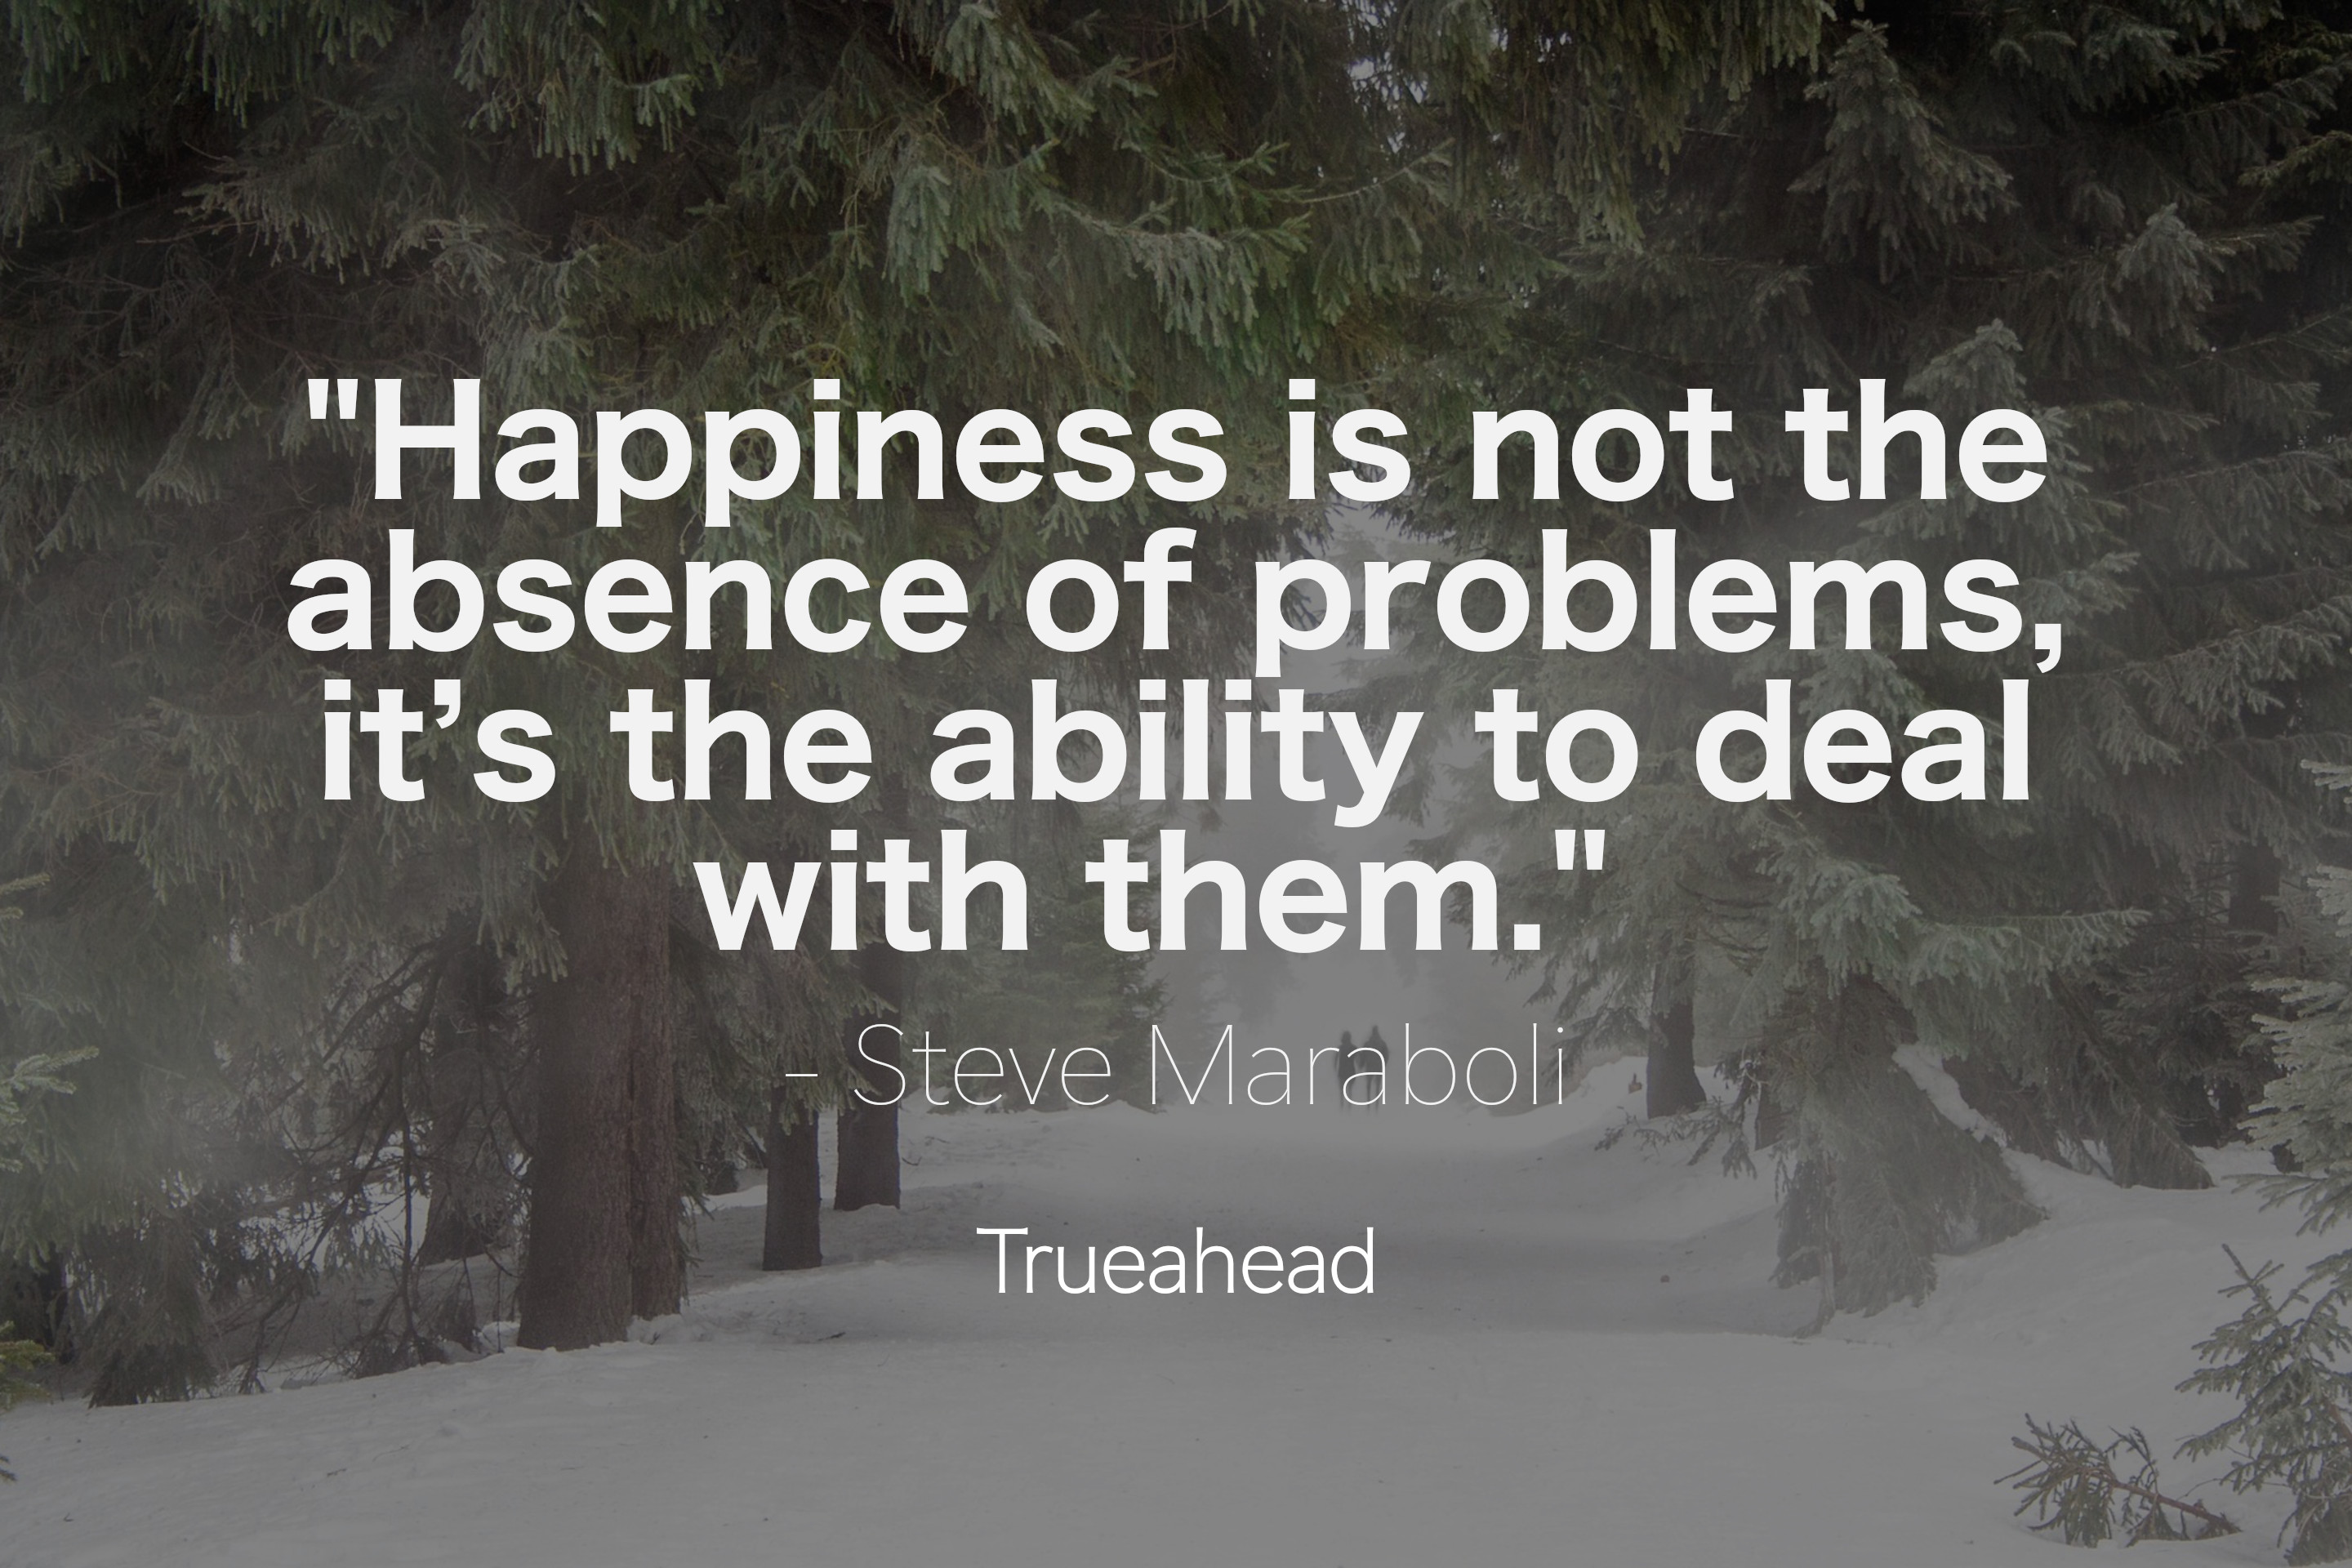 About Happiness and Problems by Steve Maraboli - Quotes